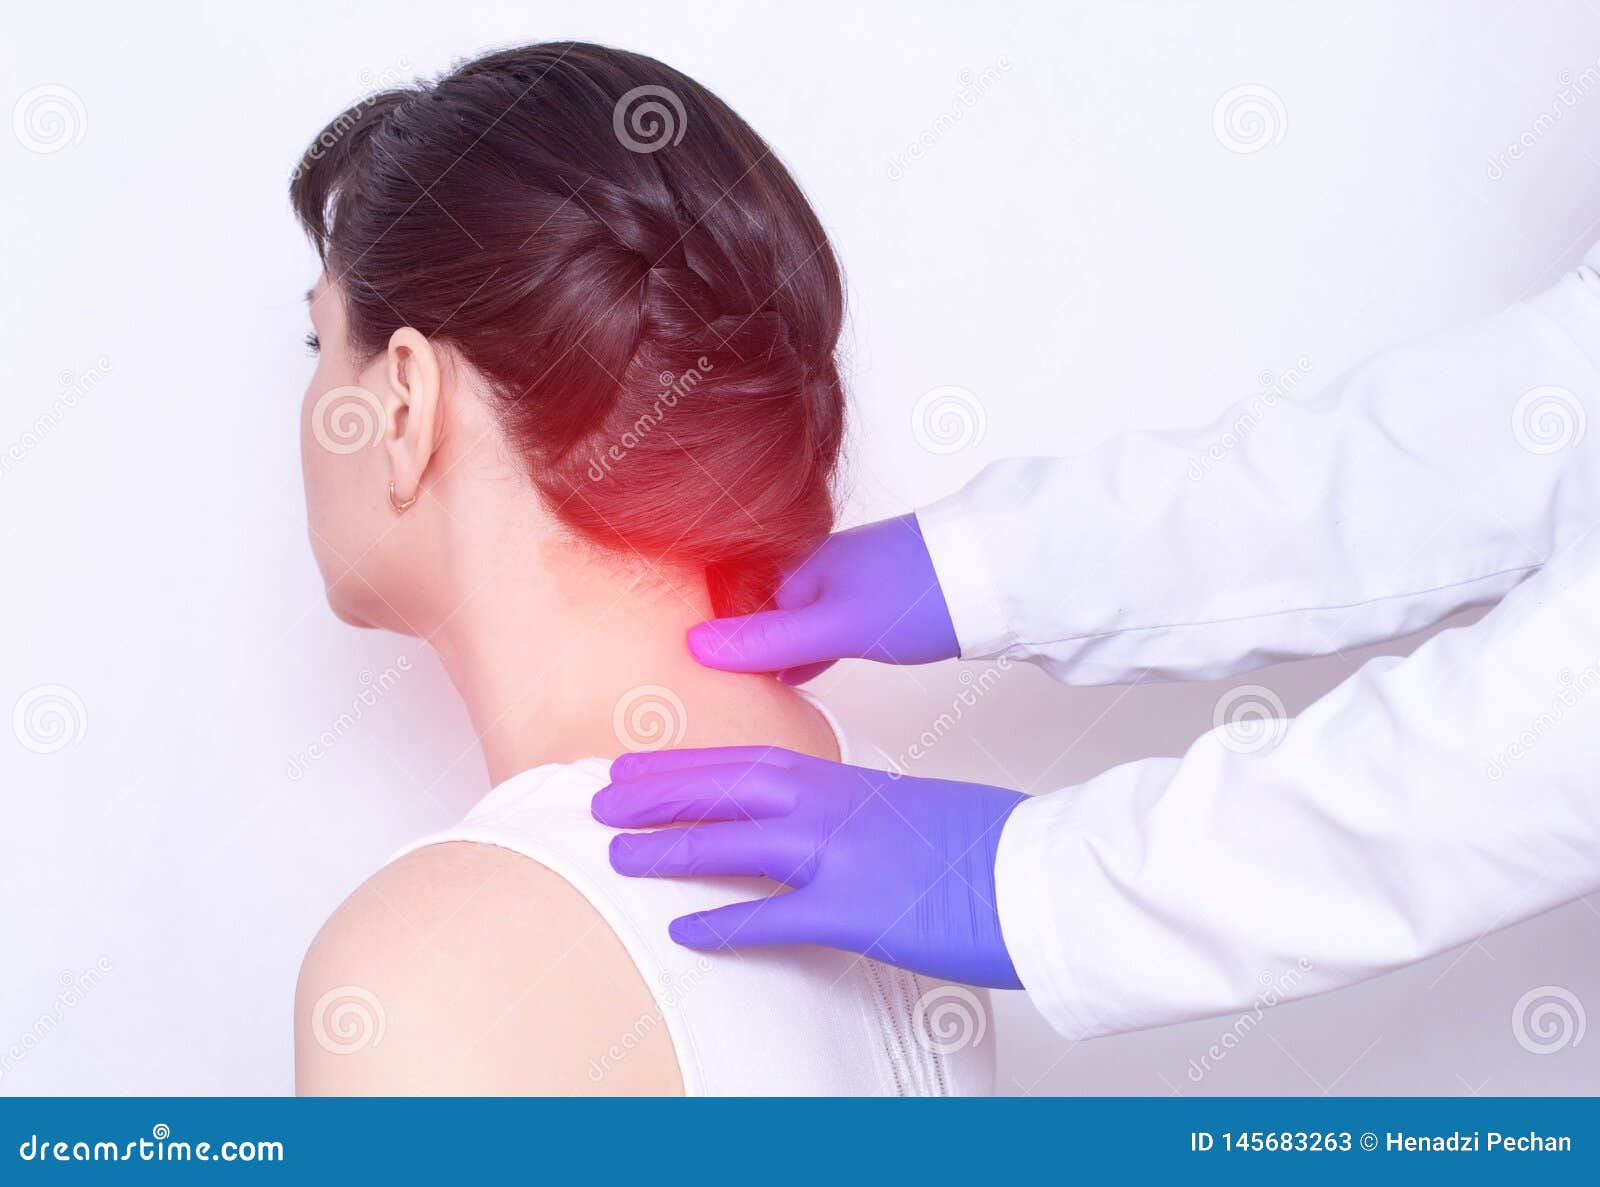 doctor neurologist examines the patient`s sore neck on a pinched nerve and protrusion of the spine, medical